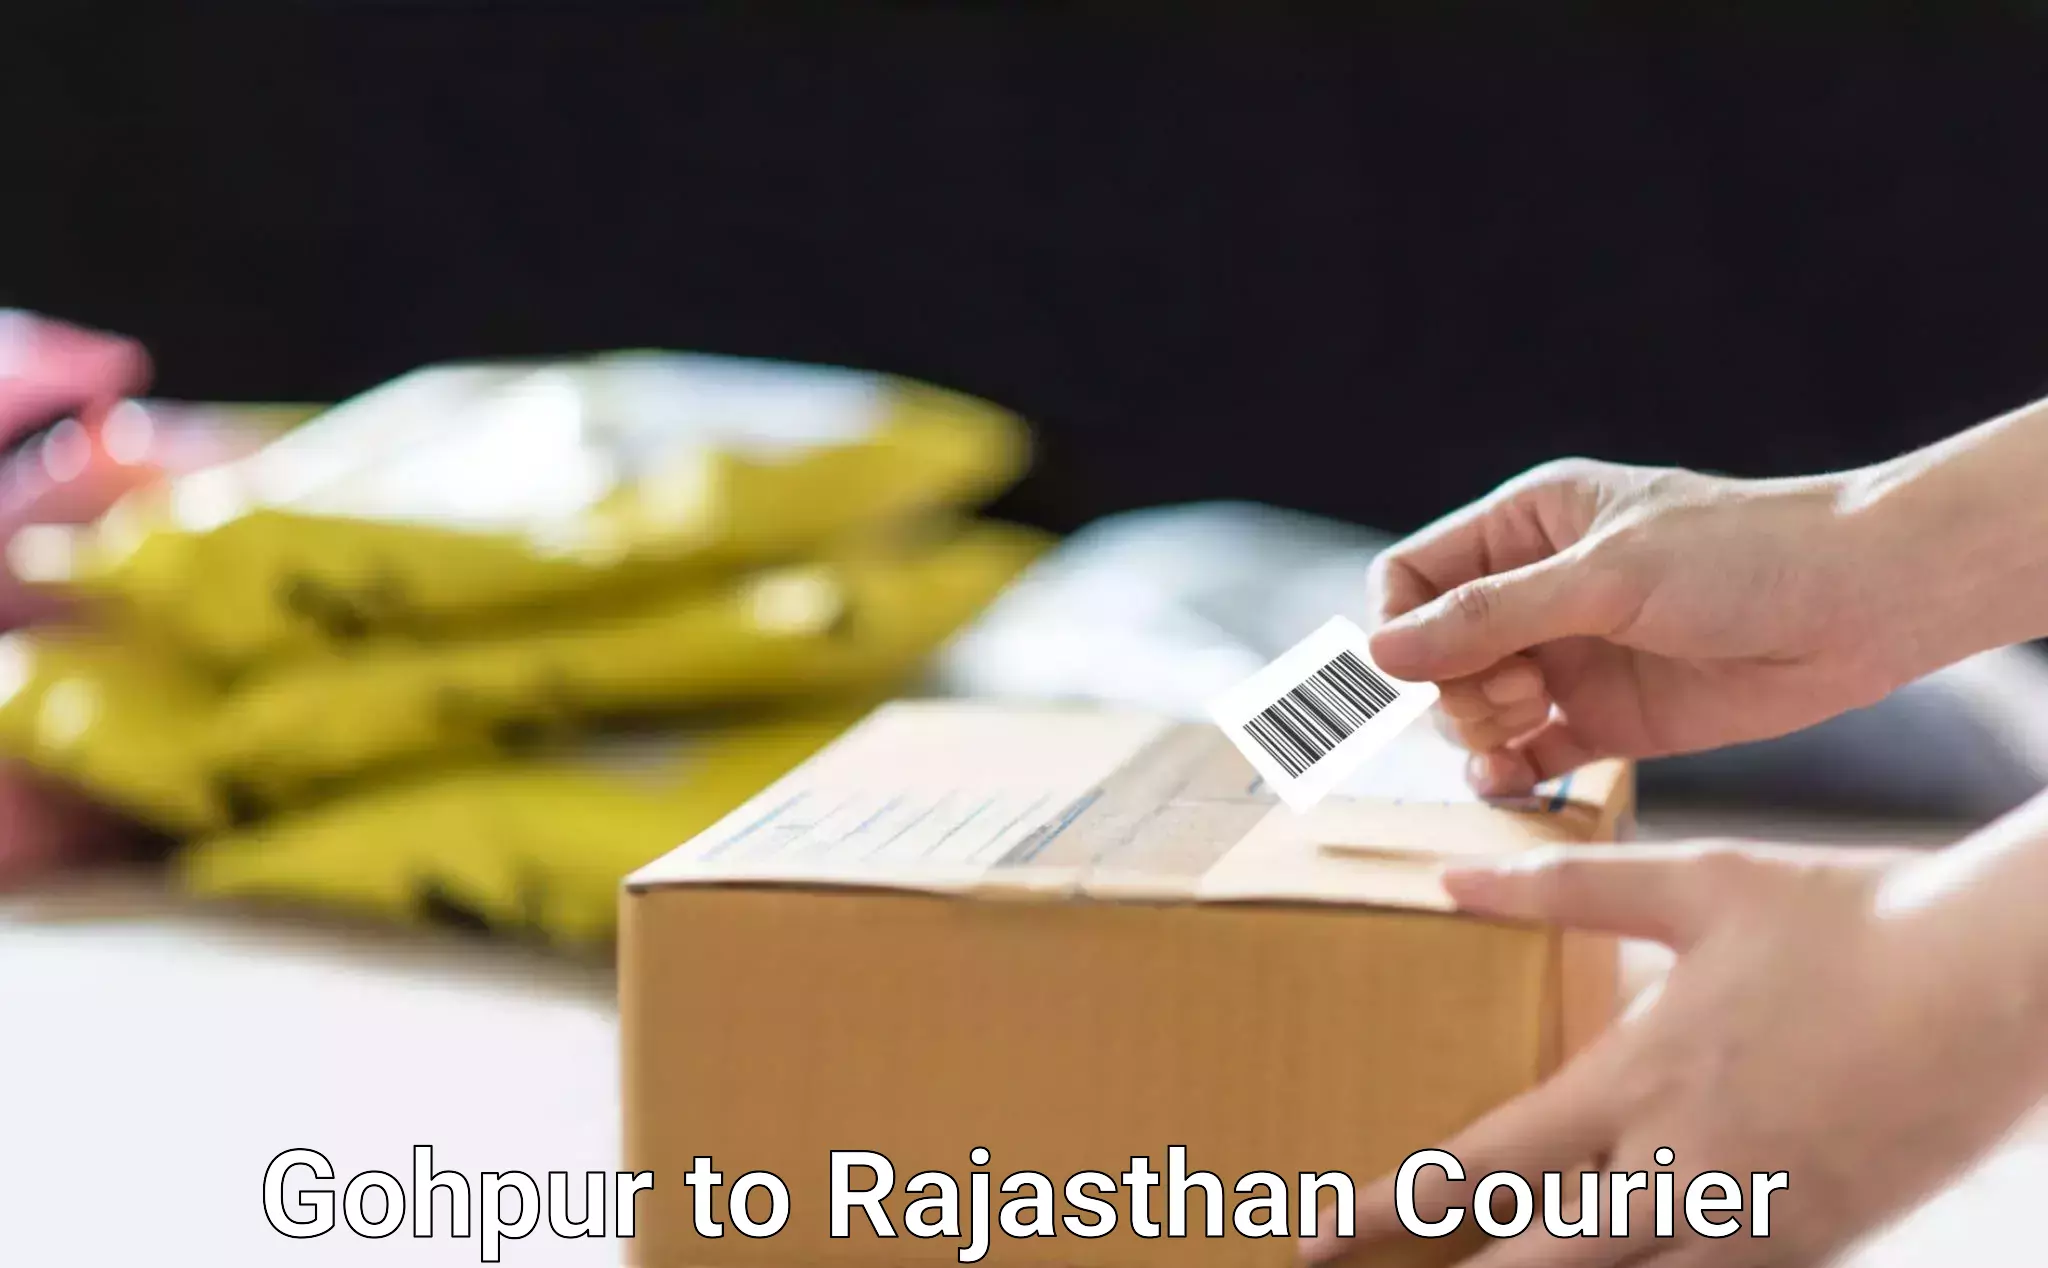 Easy access courier services in Gohpur to Tonk